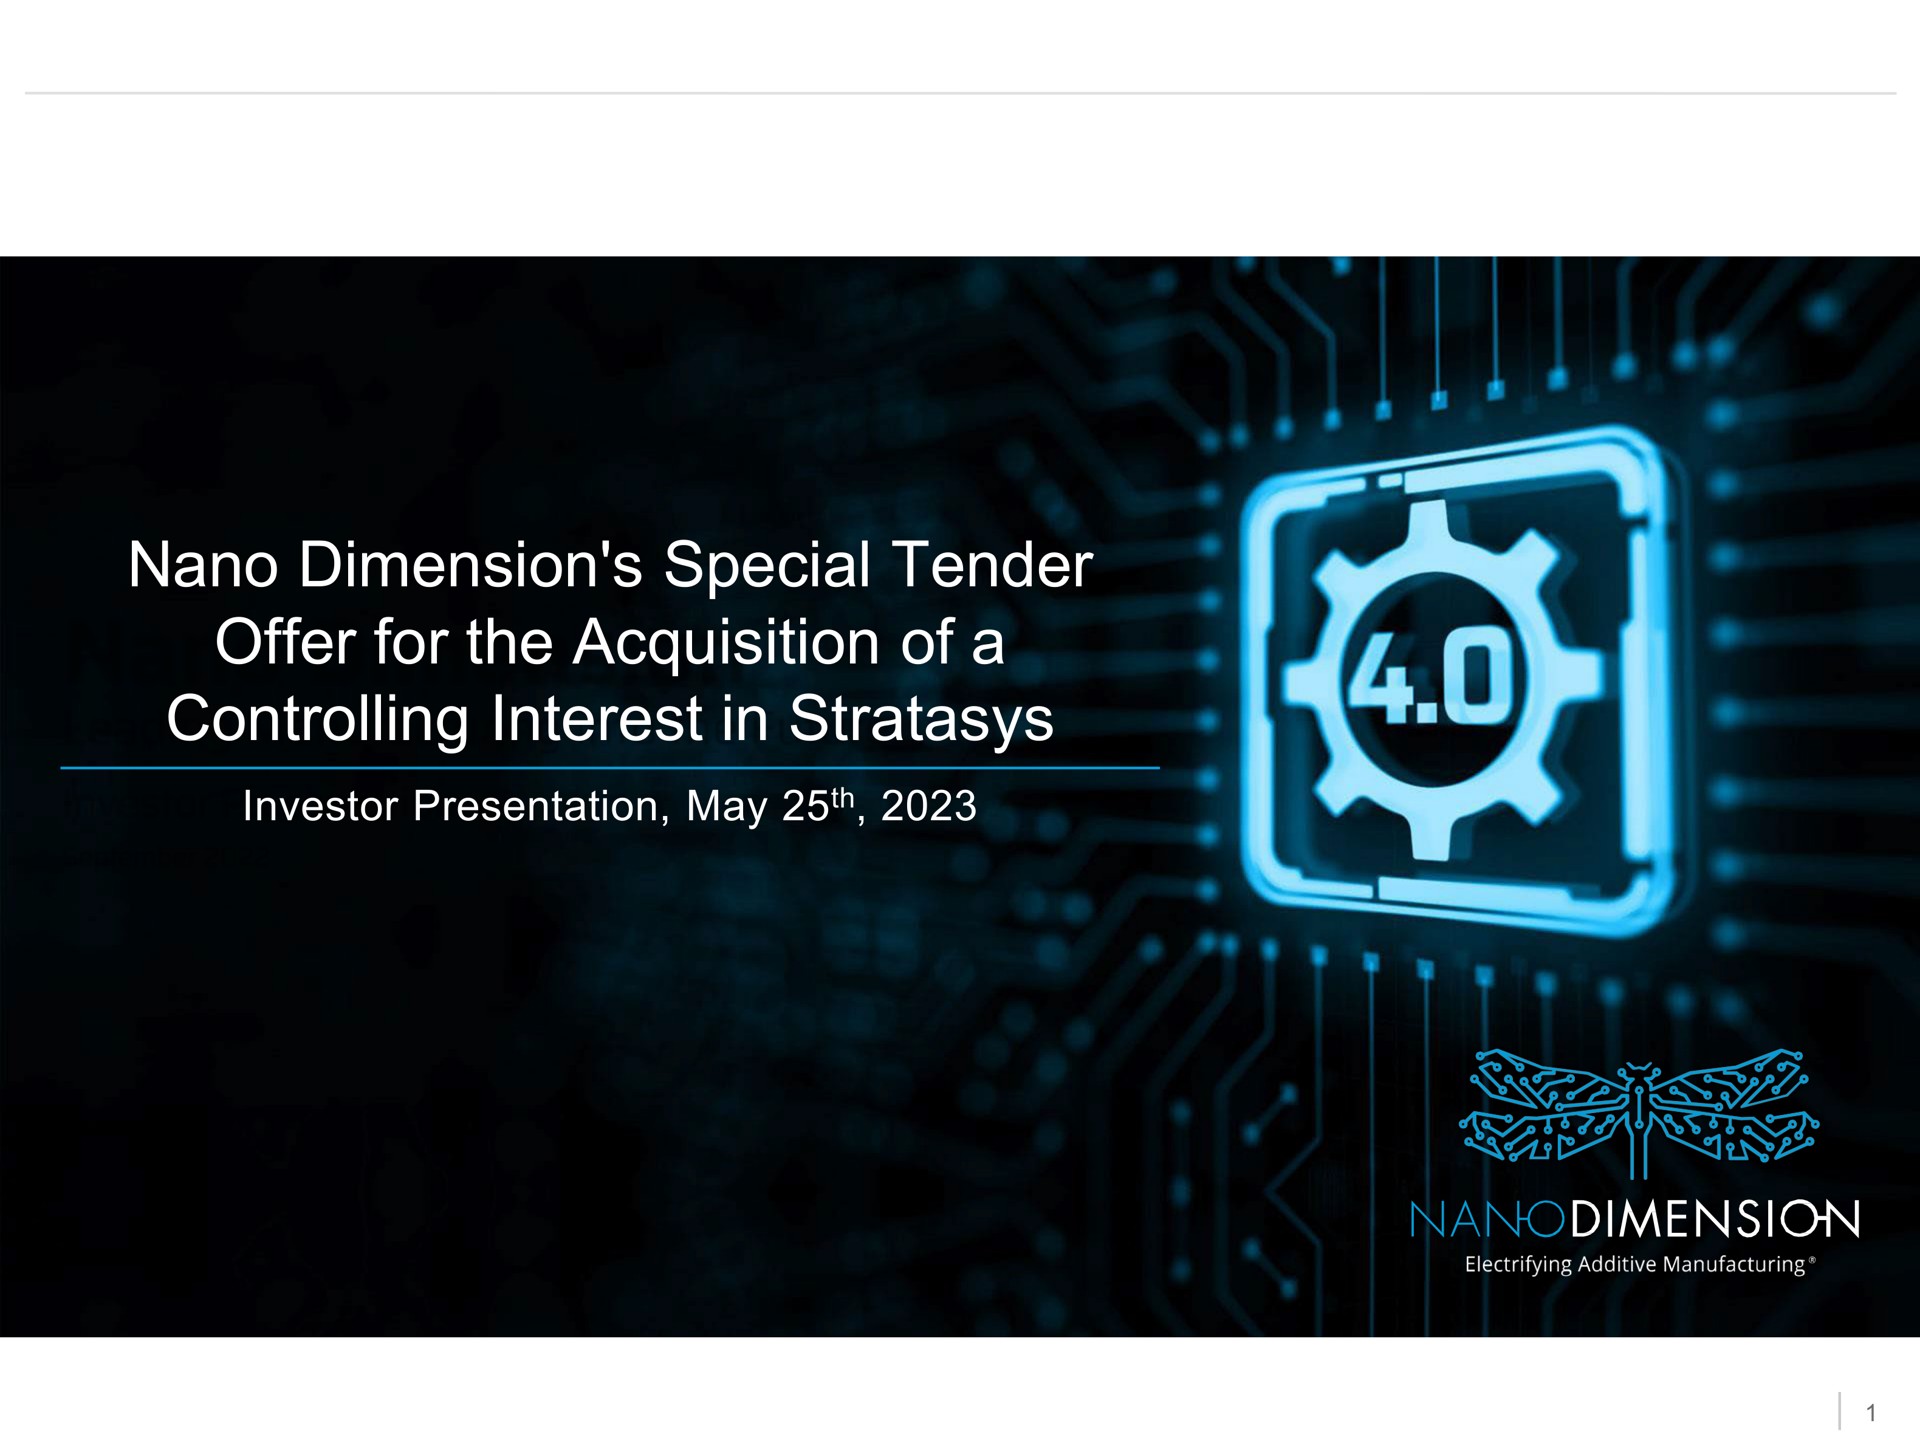 dimension special tender offer for the acquisition of a controlling interest in | Nano Dimension